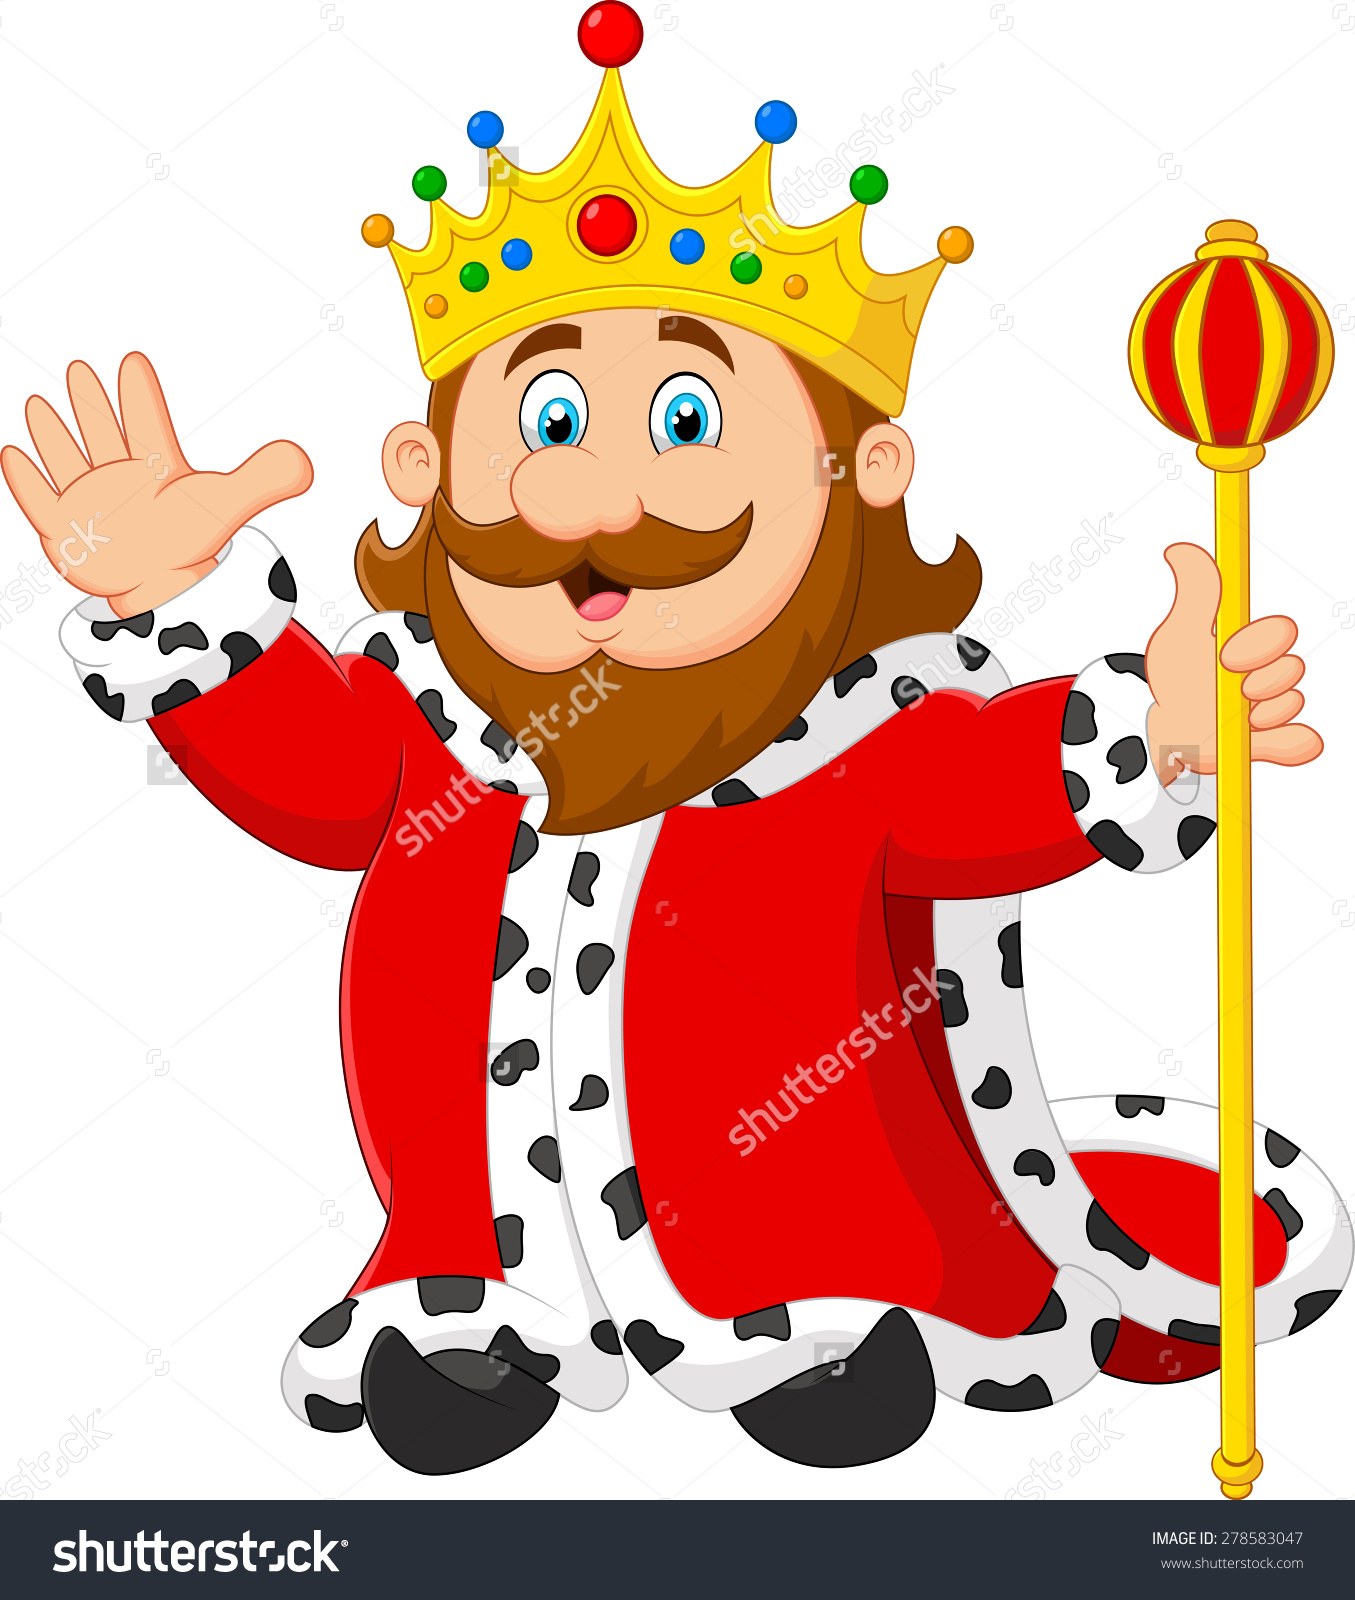 king and queen of hearts clip art - photo #31